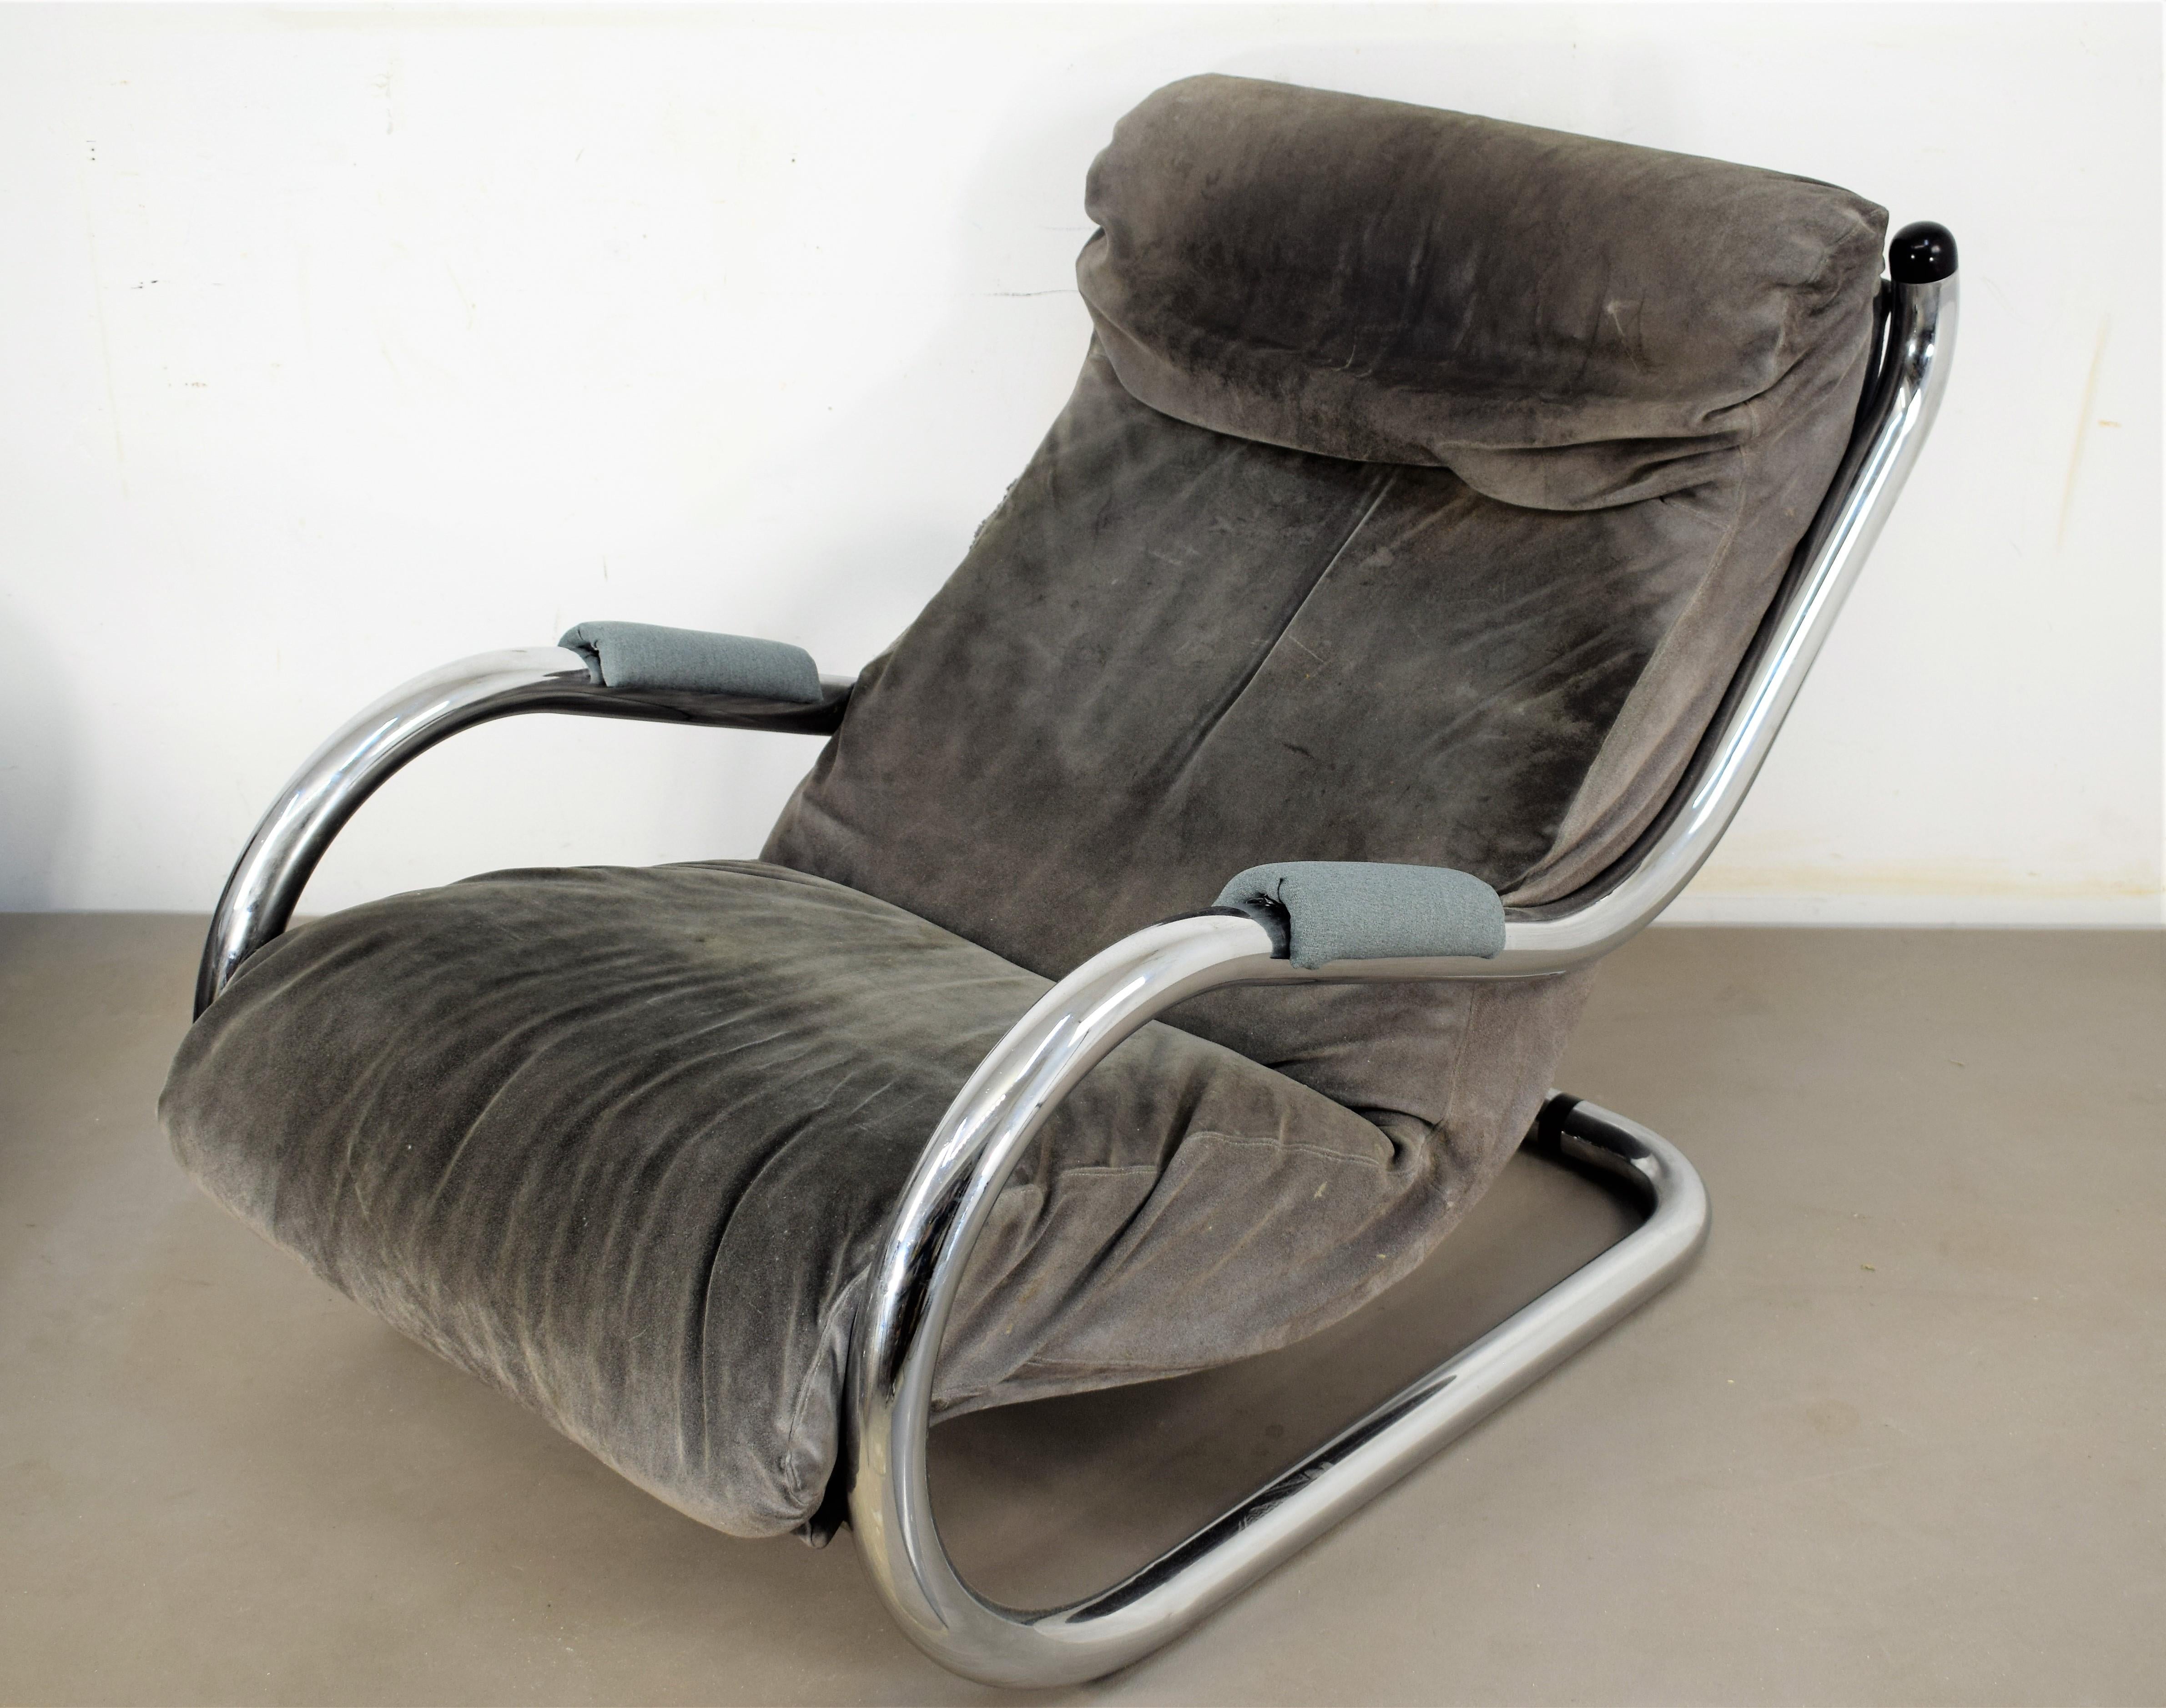 Italian armchair and pouf, 1970s.
Dimensions: 
Armchair H=75 cm; W=69 cm; D=110 cm; Height seat = 34.
Pouf H=40 cm; W=68 cm; D= 57 cm.